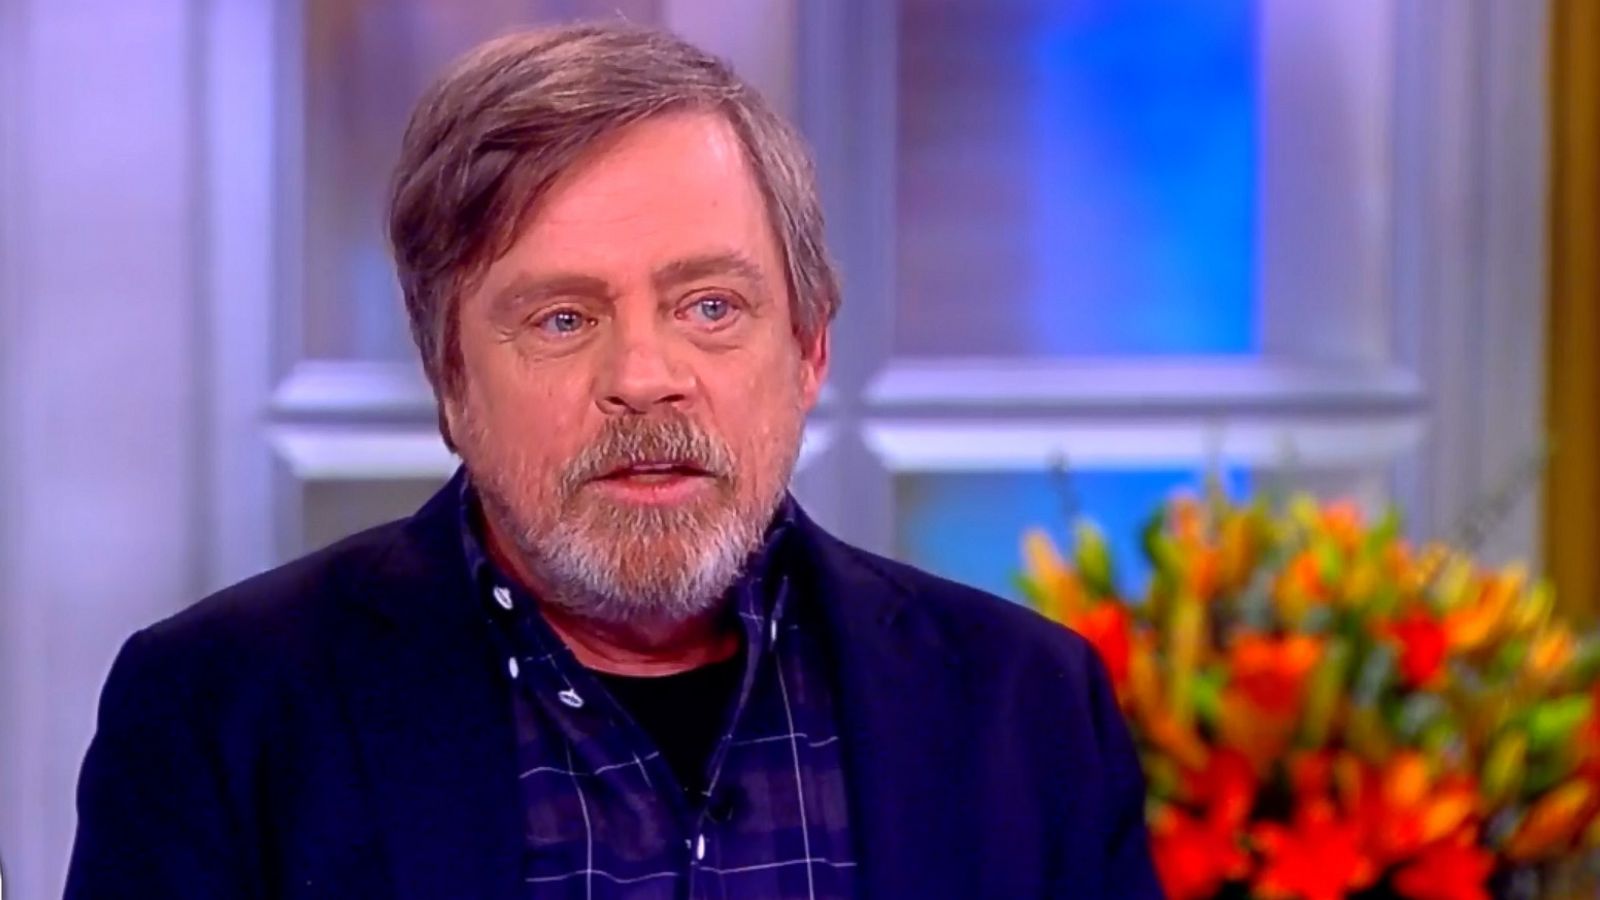 Mark Hamill calls for limits on de-aging, calls for age